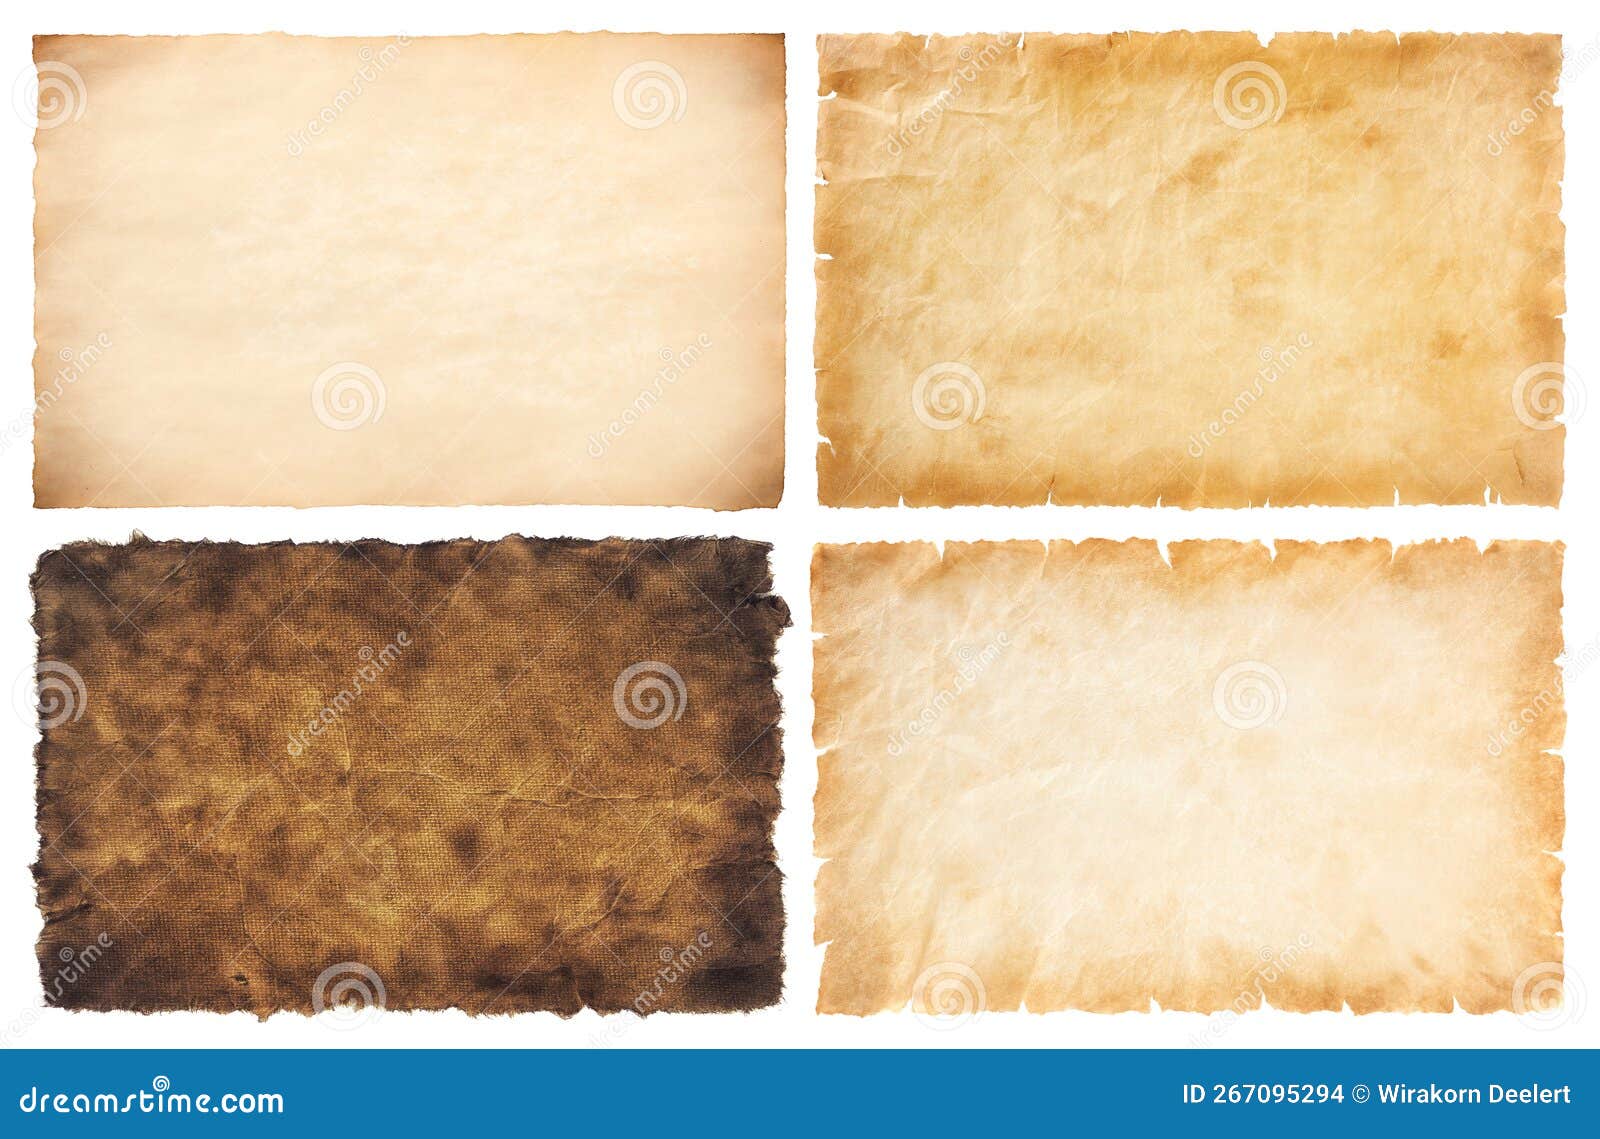 https://thumbs.dreamstime.com/z/collection-set-old-parchment-paper-sheet-vintage-aged-texture-isolated-white-background-267095294.jpg